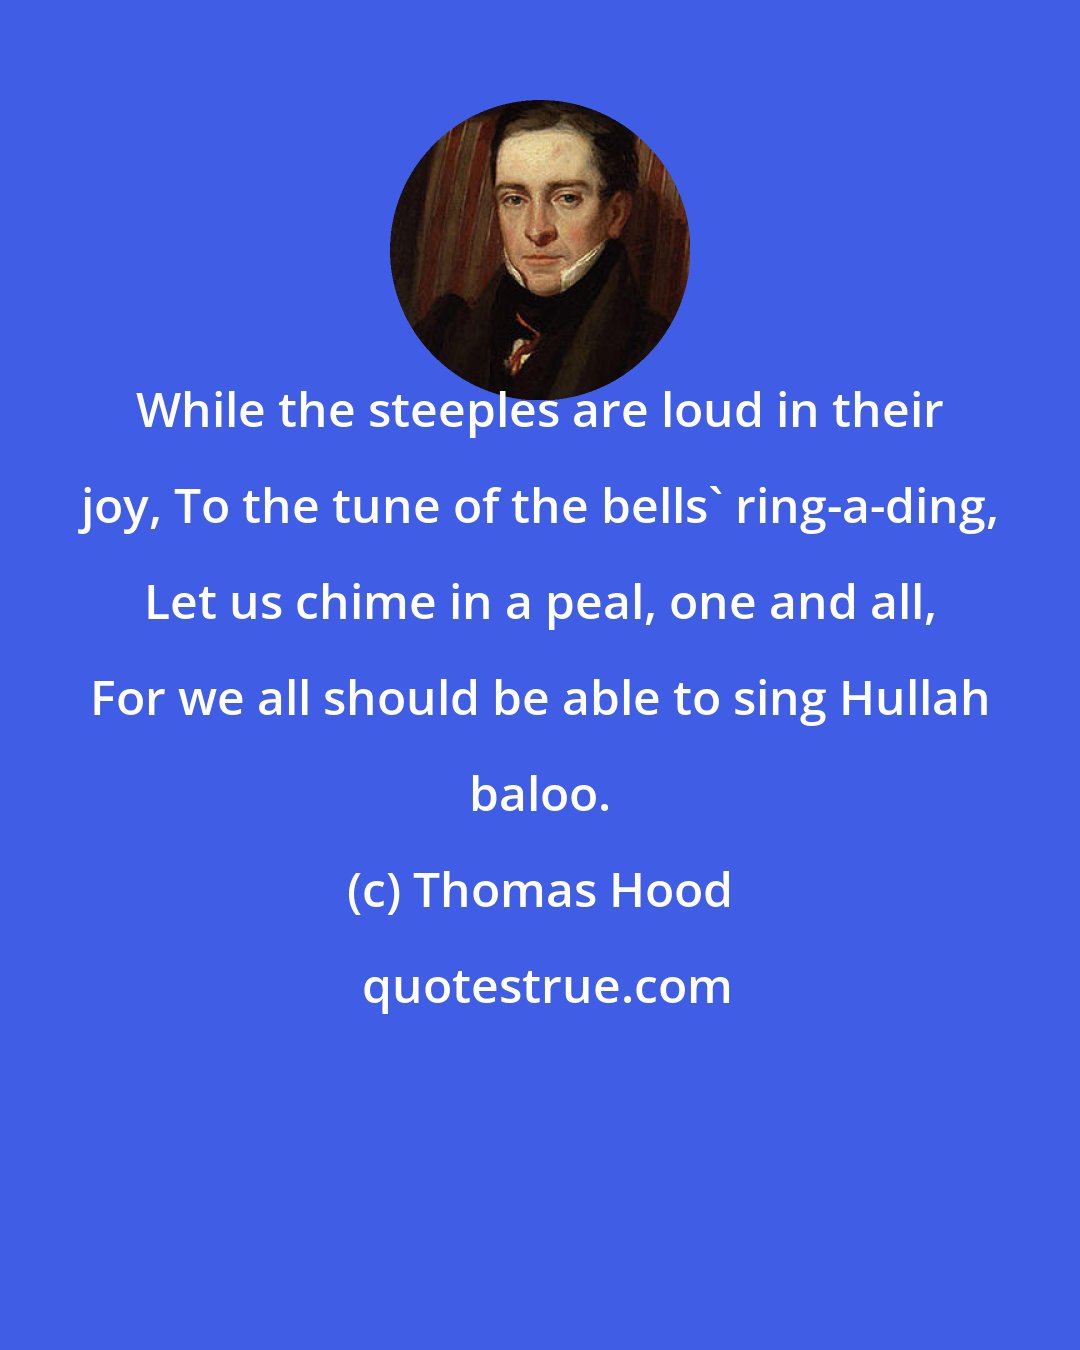 Thomas Hood: While the steeples are loud in their joy, To the tune of the bells' ring-a-ding, Let us chime in a peal, one and all, For we all should be able to sing Hullah baloo.